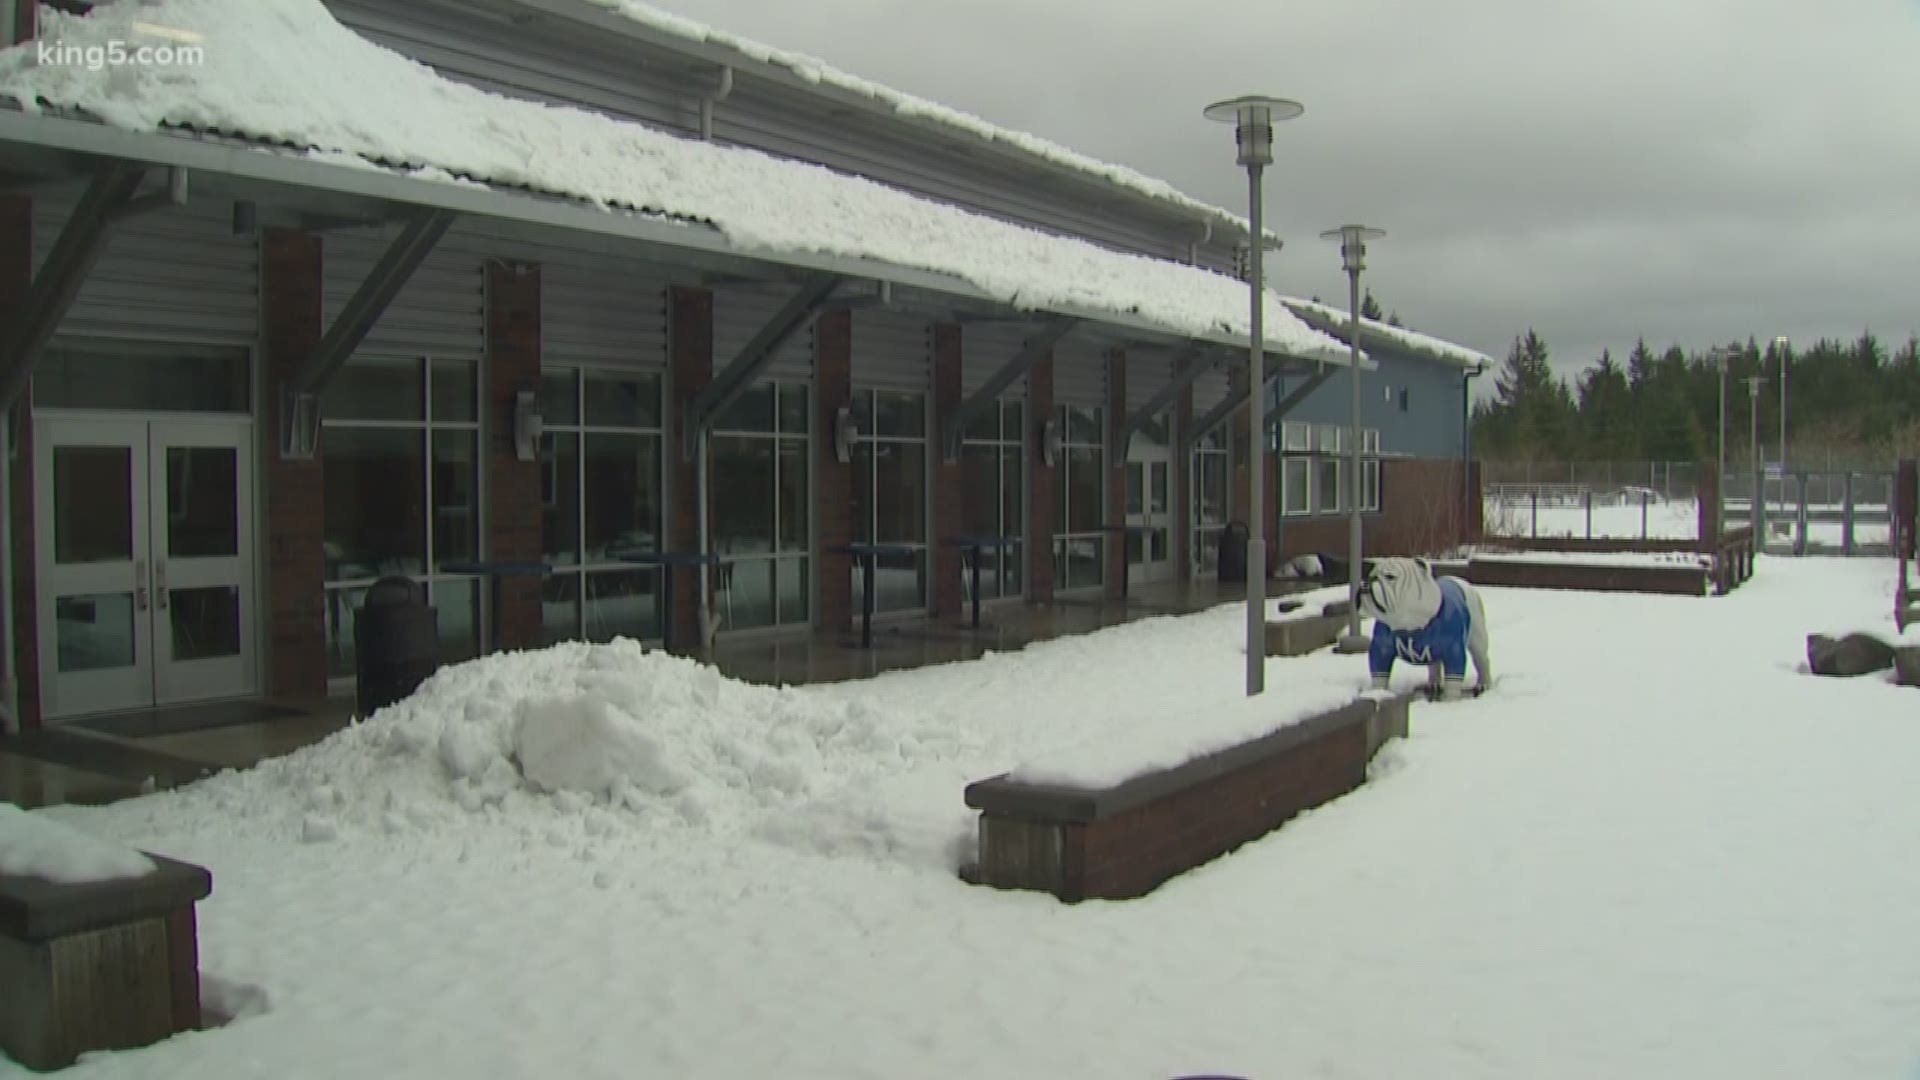 Washington school districts worried about making up cancellations caused by snowy weather are already looking to the state superintendent's office for relief. Two districts have already applied for waivers to not have to make up three snow days. KING 5 Drew Mikkelson reports.